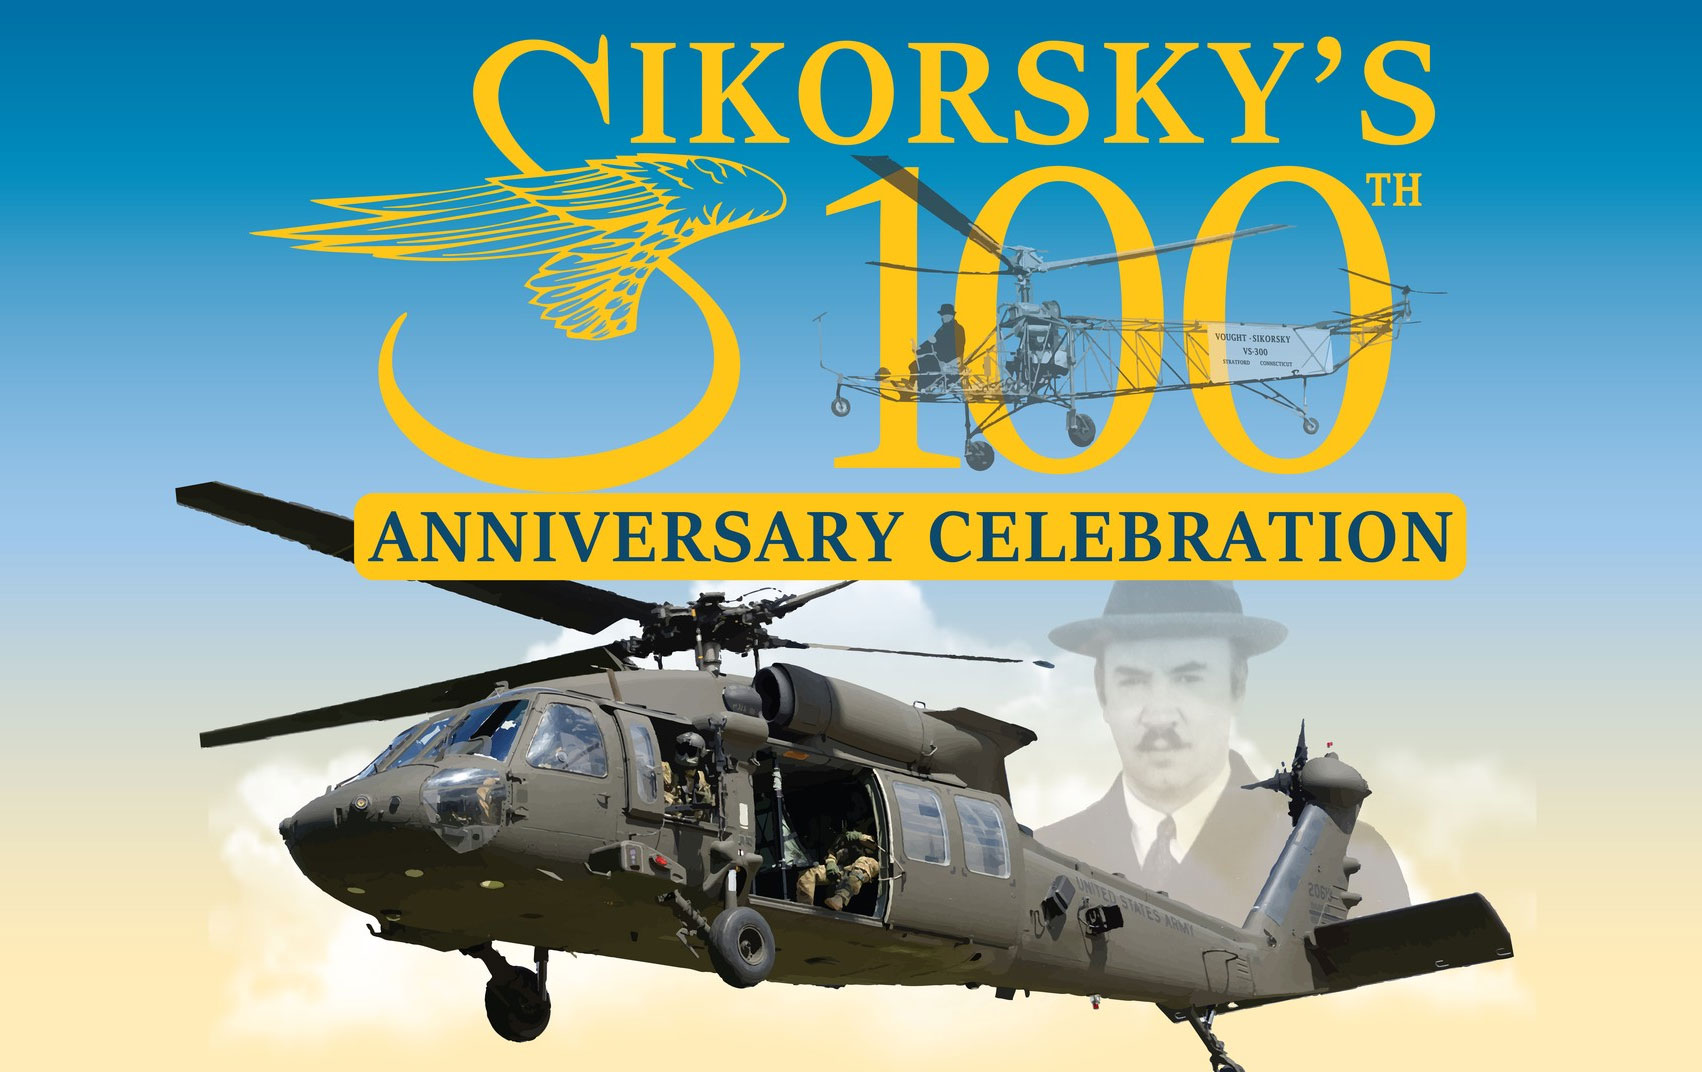 Sikorsky's 100th Anniversary Celebration at the Connecticut Air & Space Center